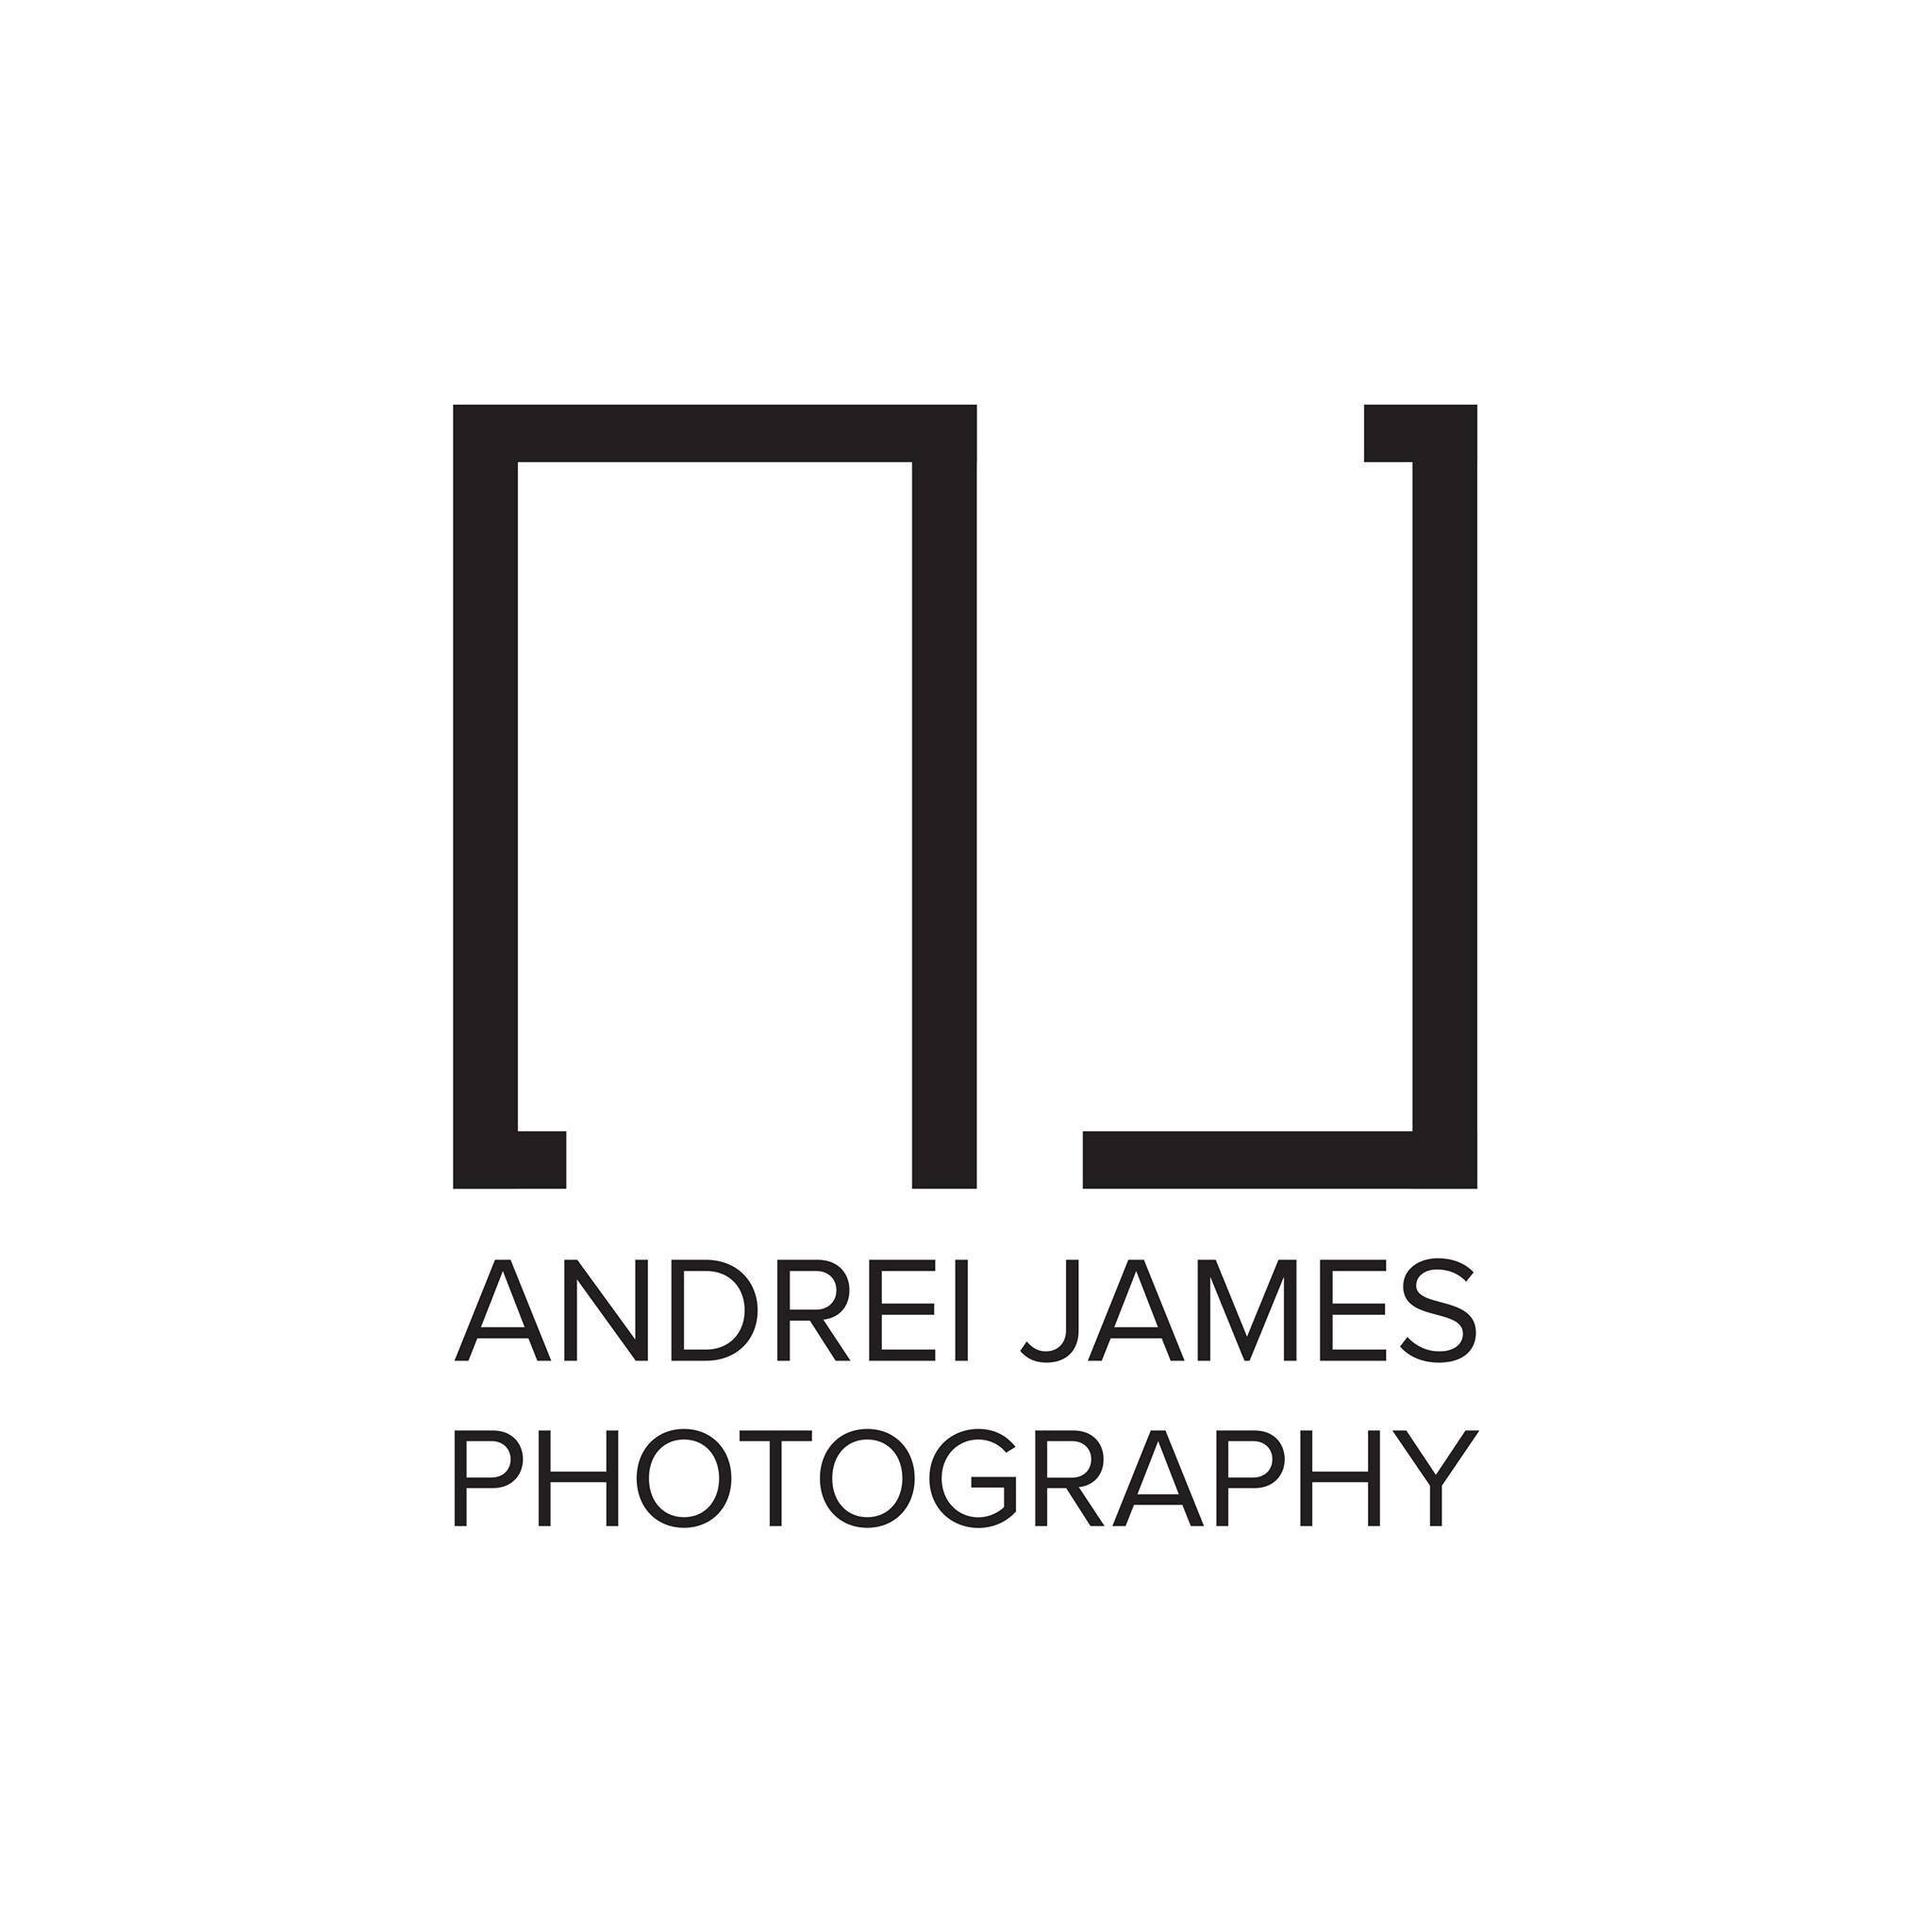 Andrei James Photography